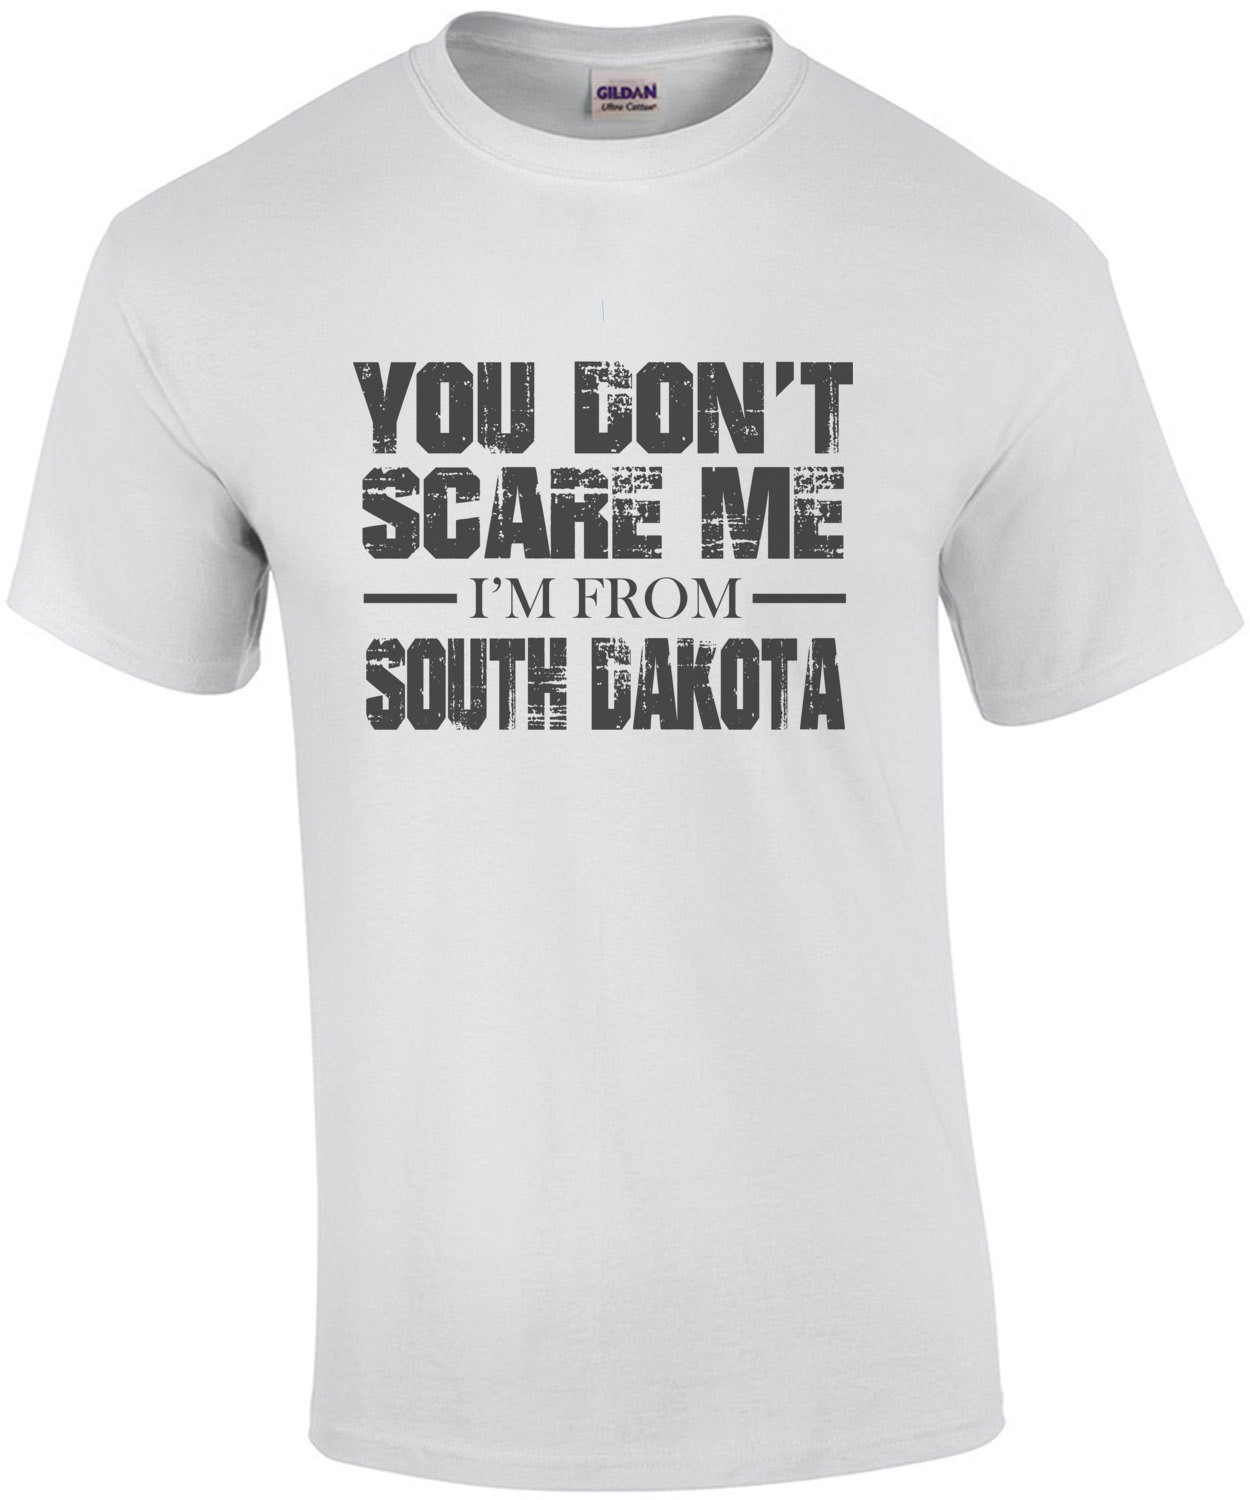 You don't scare me - I'm from - South Dakota - Tshirt